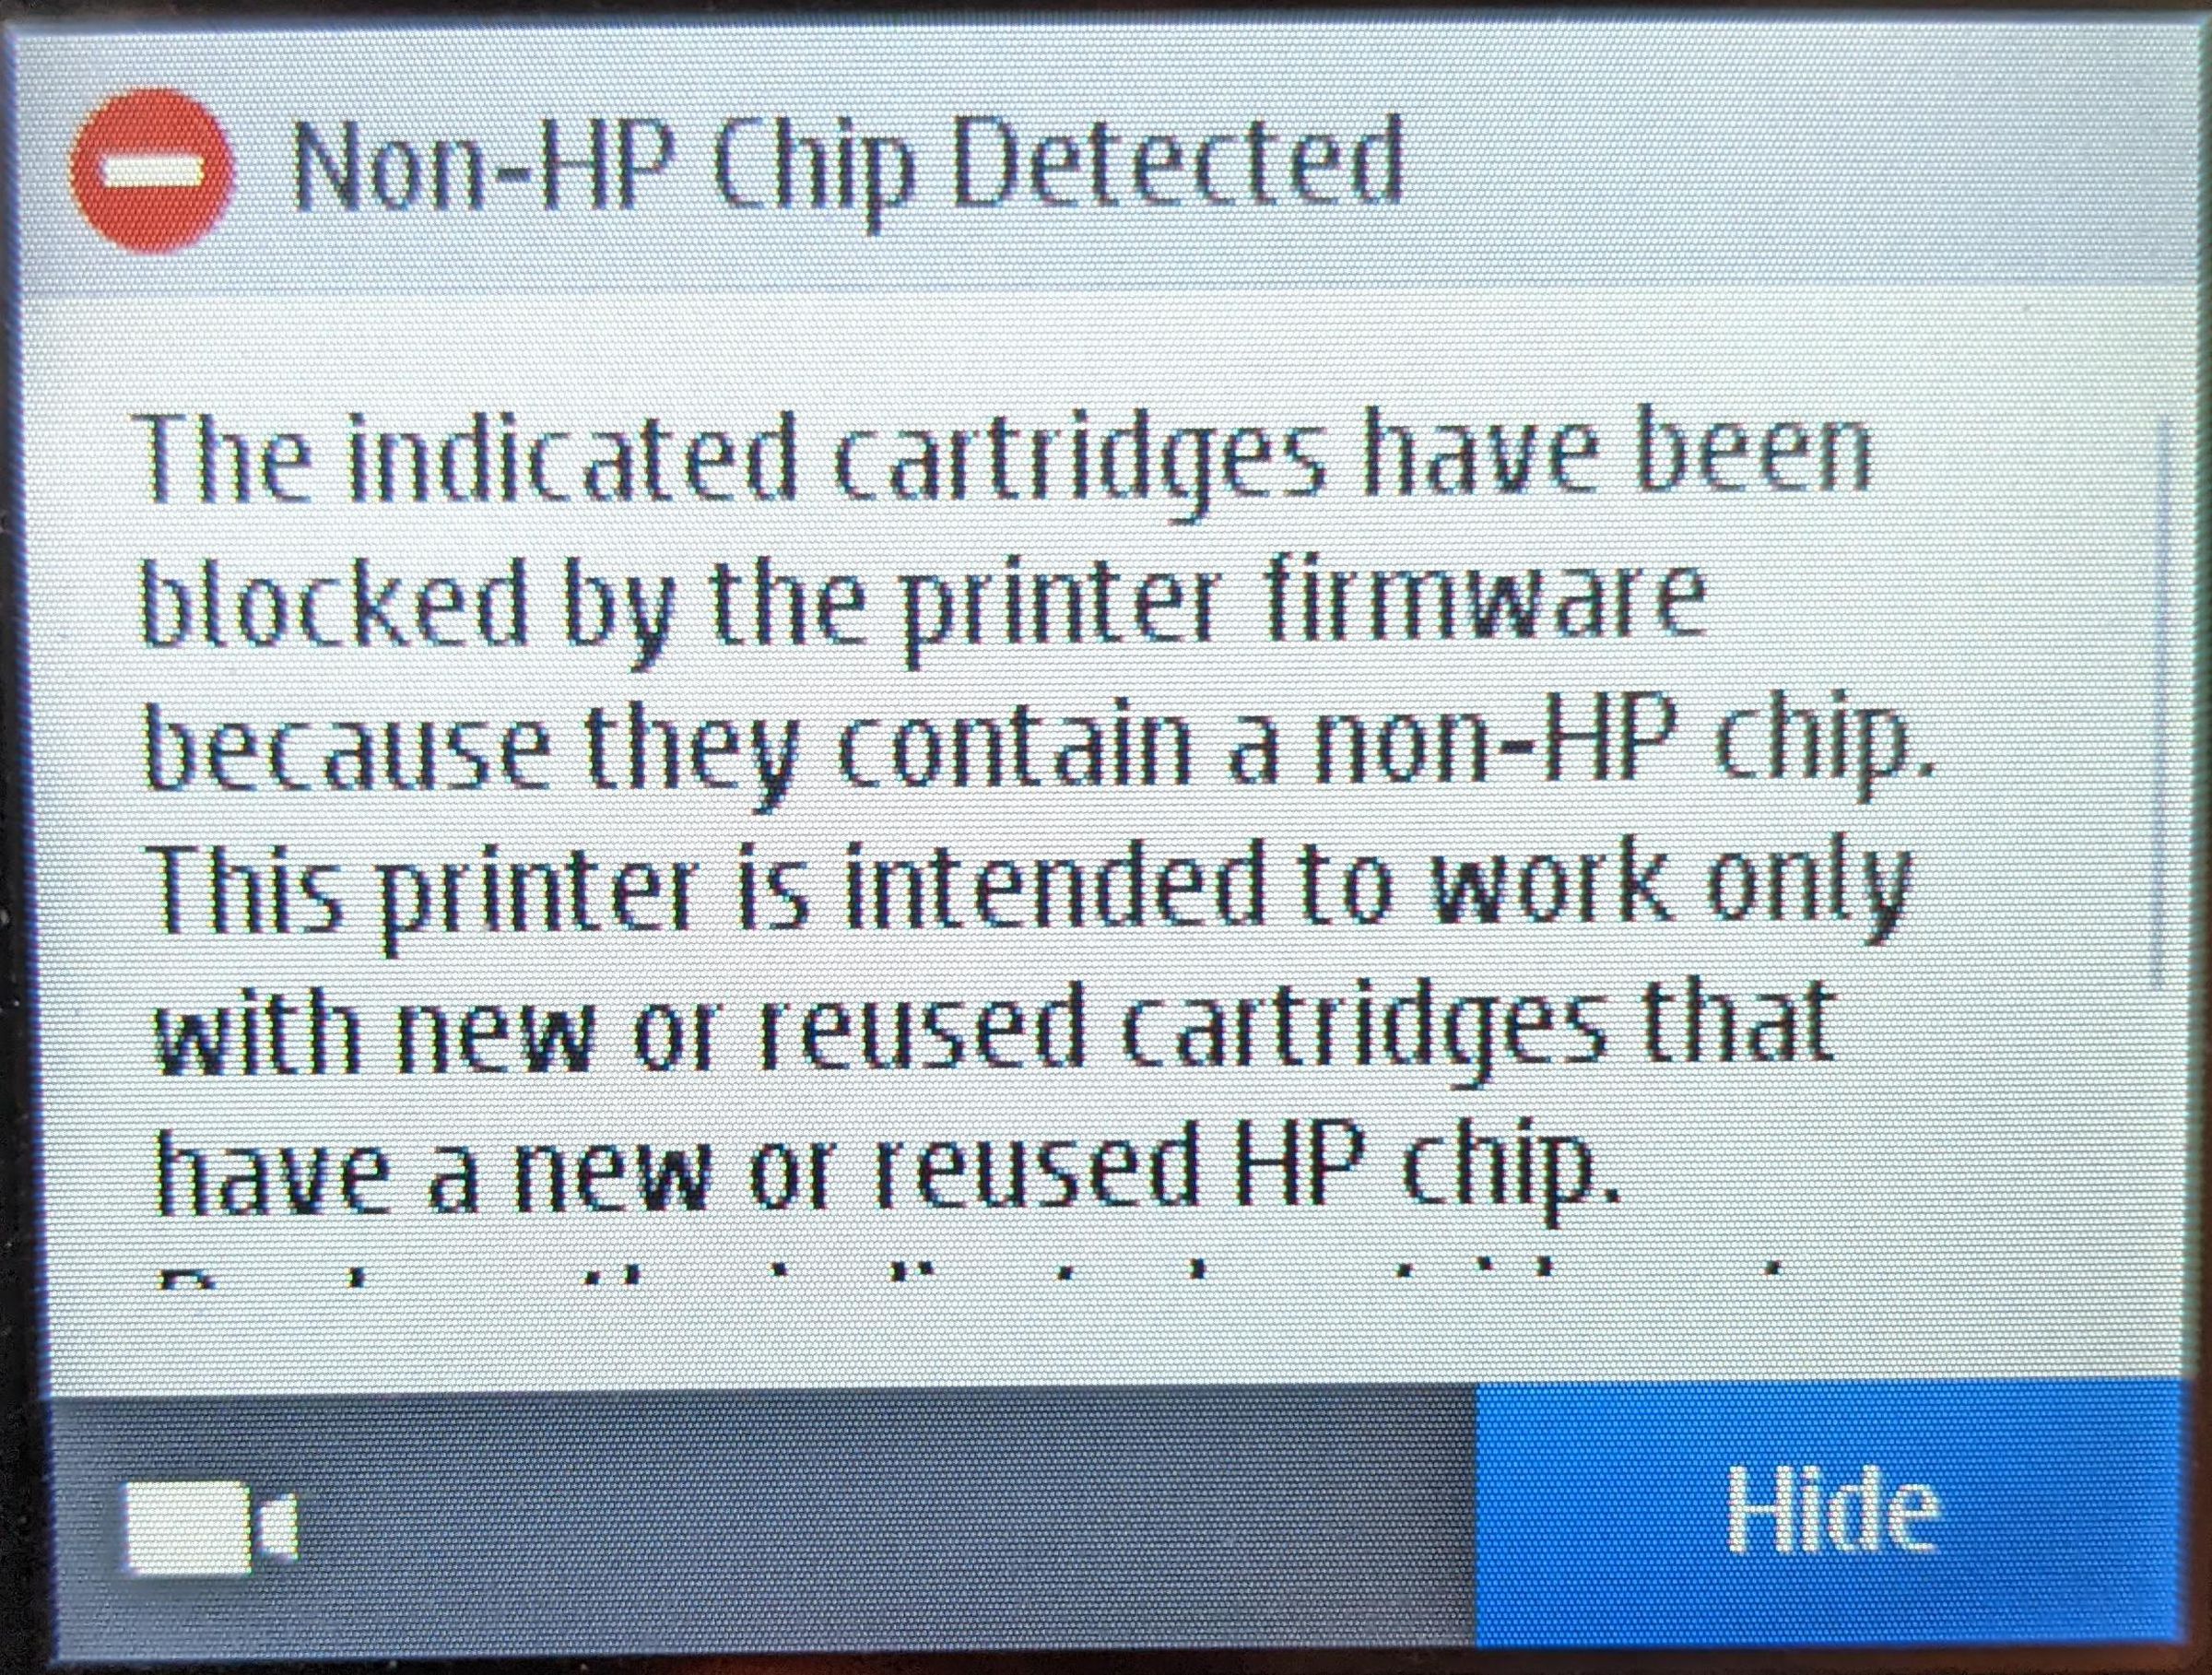 Some HP printers won’t print at all when third-party ink cartridges are installed.